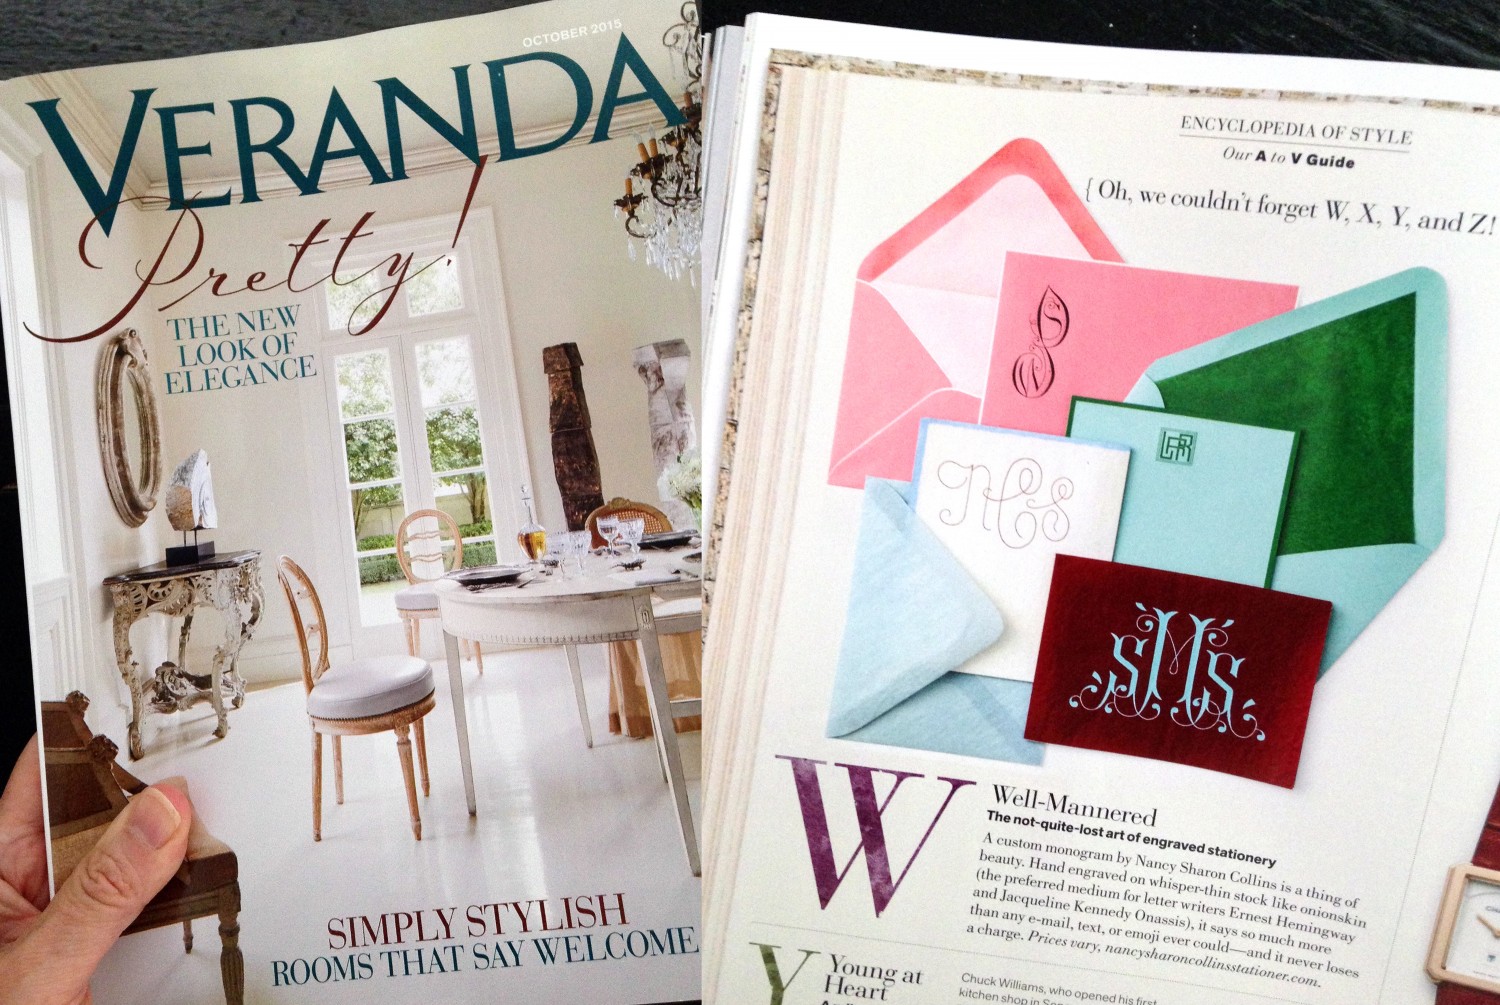 See page 76 of Veranda magazine: Hand engraved stationery by Nancy Sharon Collins.